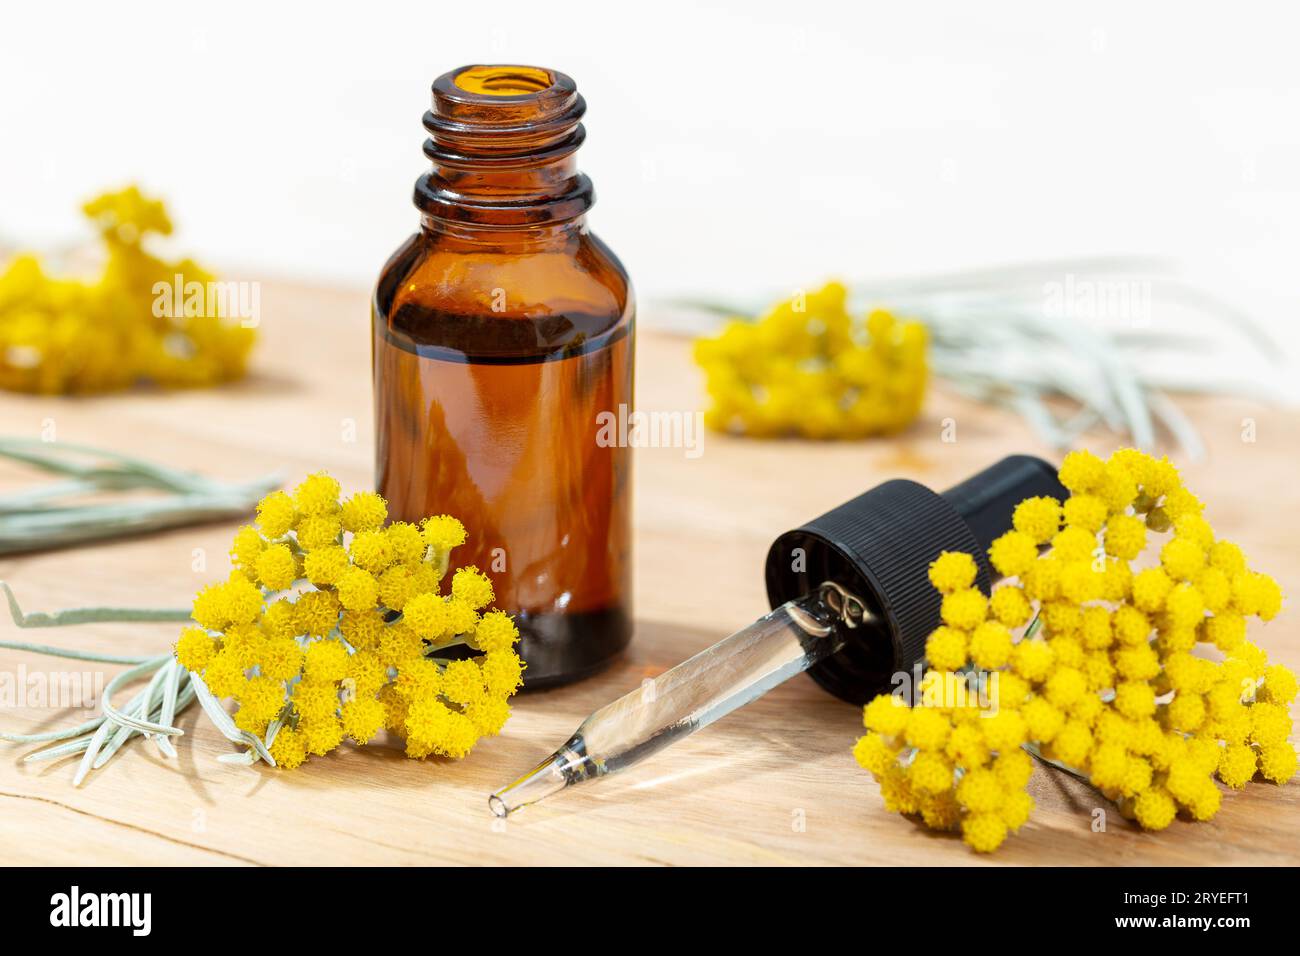 Helichrysum essential oil in amber bottle and pipette Stock Photo